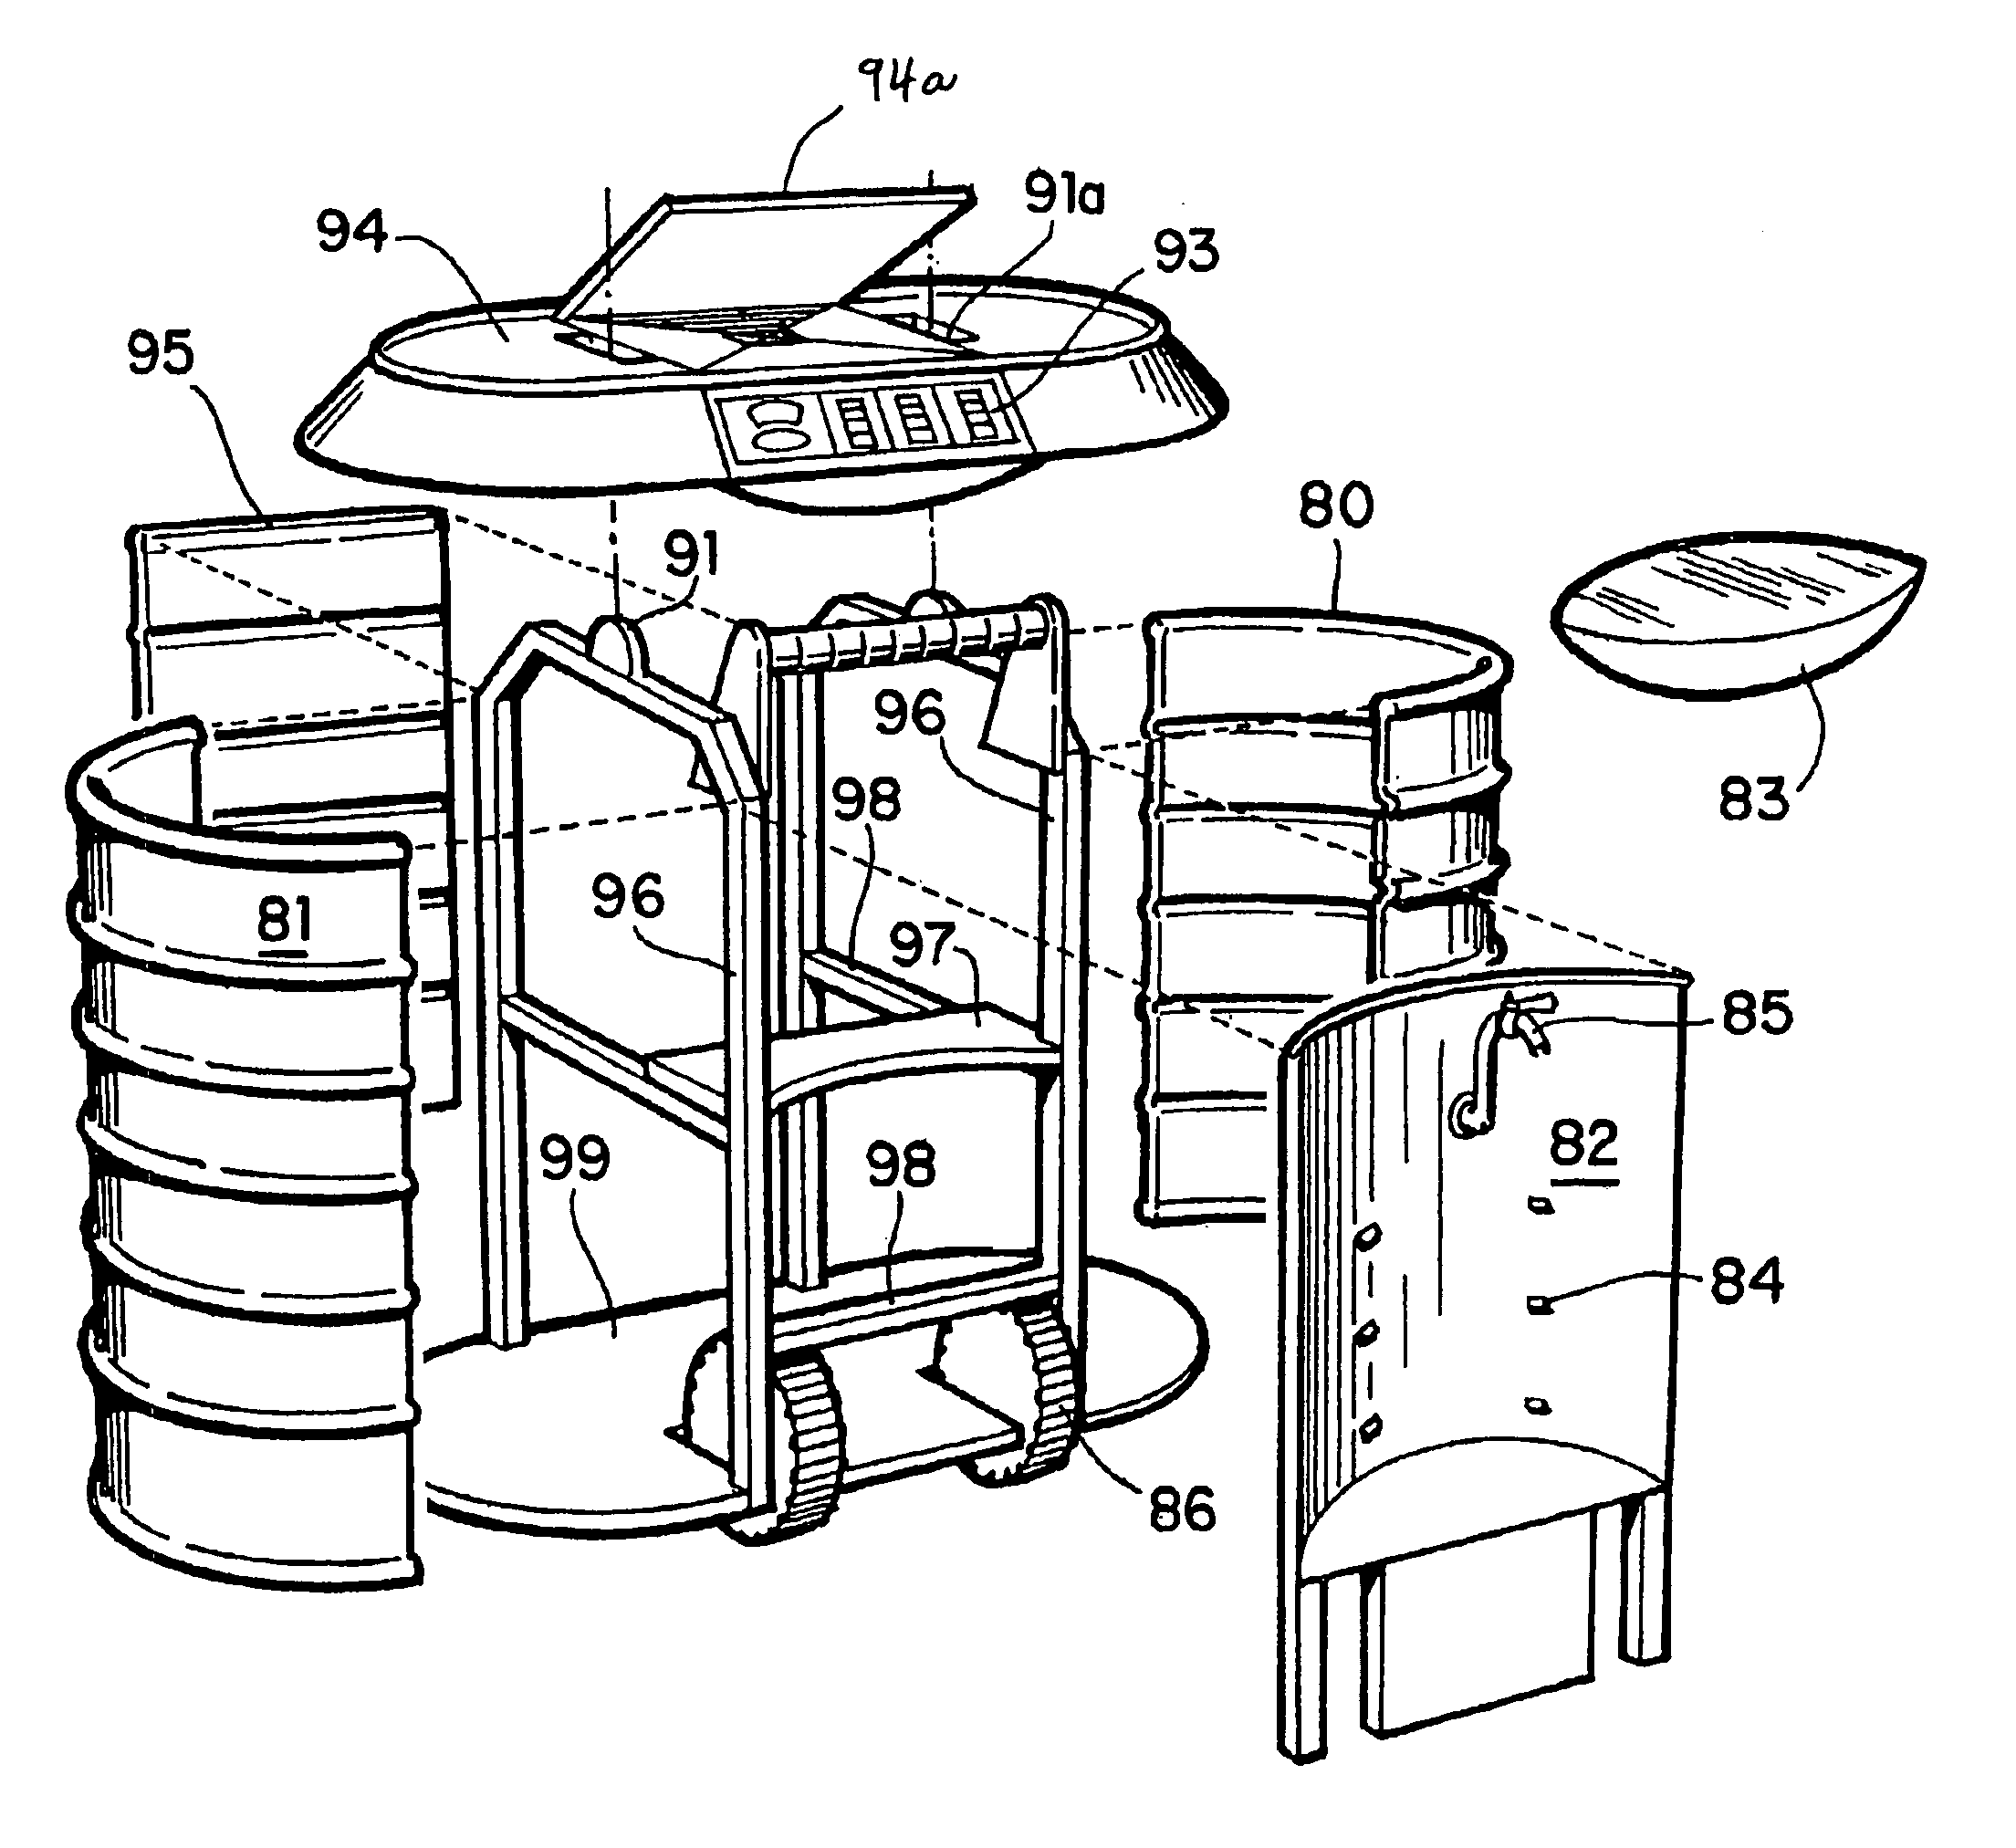 Renewable portable stored energy power generating apparatus with alternate water source capability